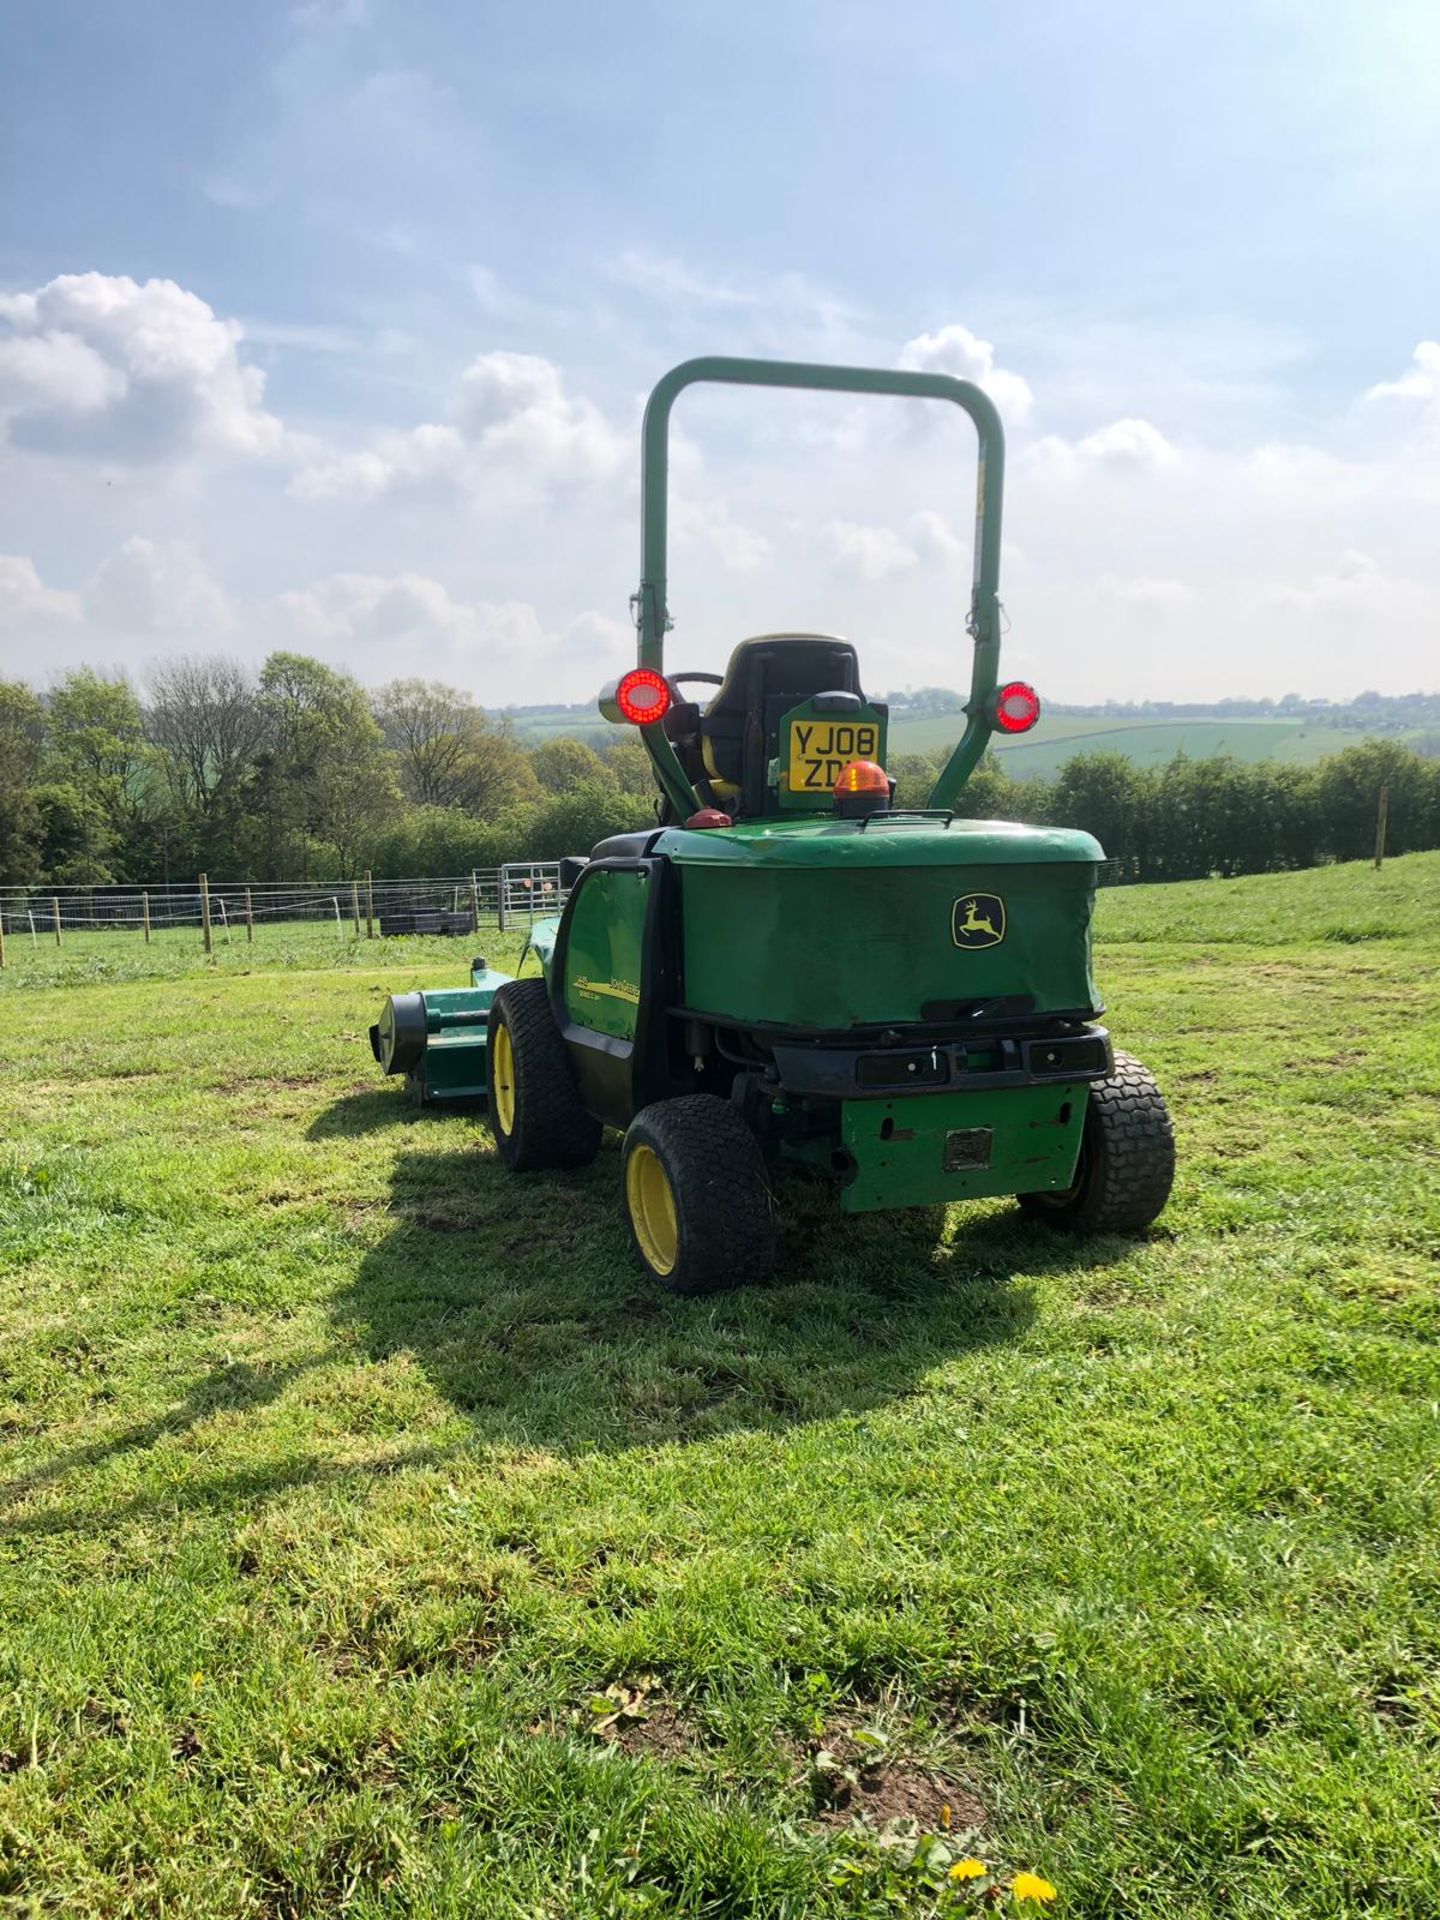 JOHN DEERE 1445 RIDE ON LAWN MOWER WITH FLAIL MOWER, YEAR 2008, RUNS, WORKS AND CUTS *PLUS VAT* - Image 3 of 7